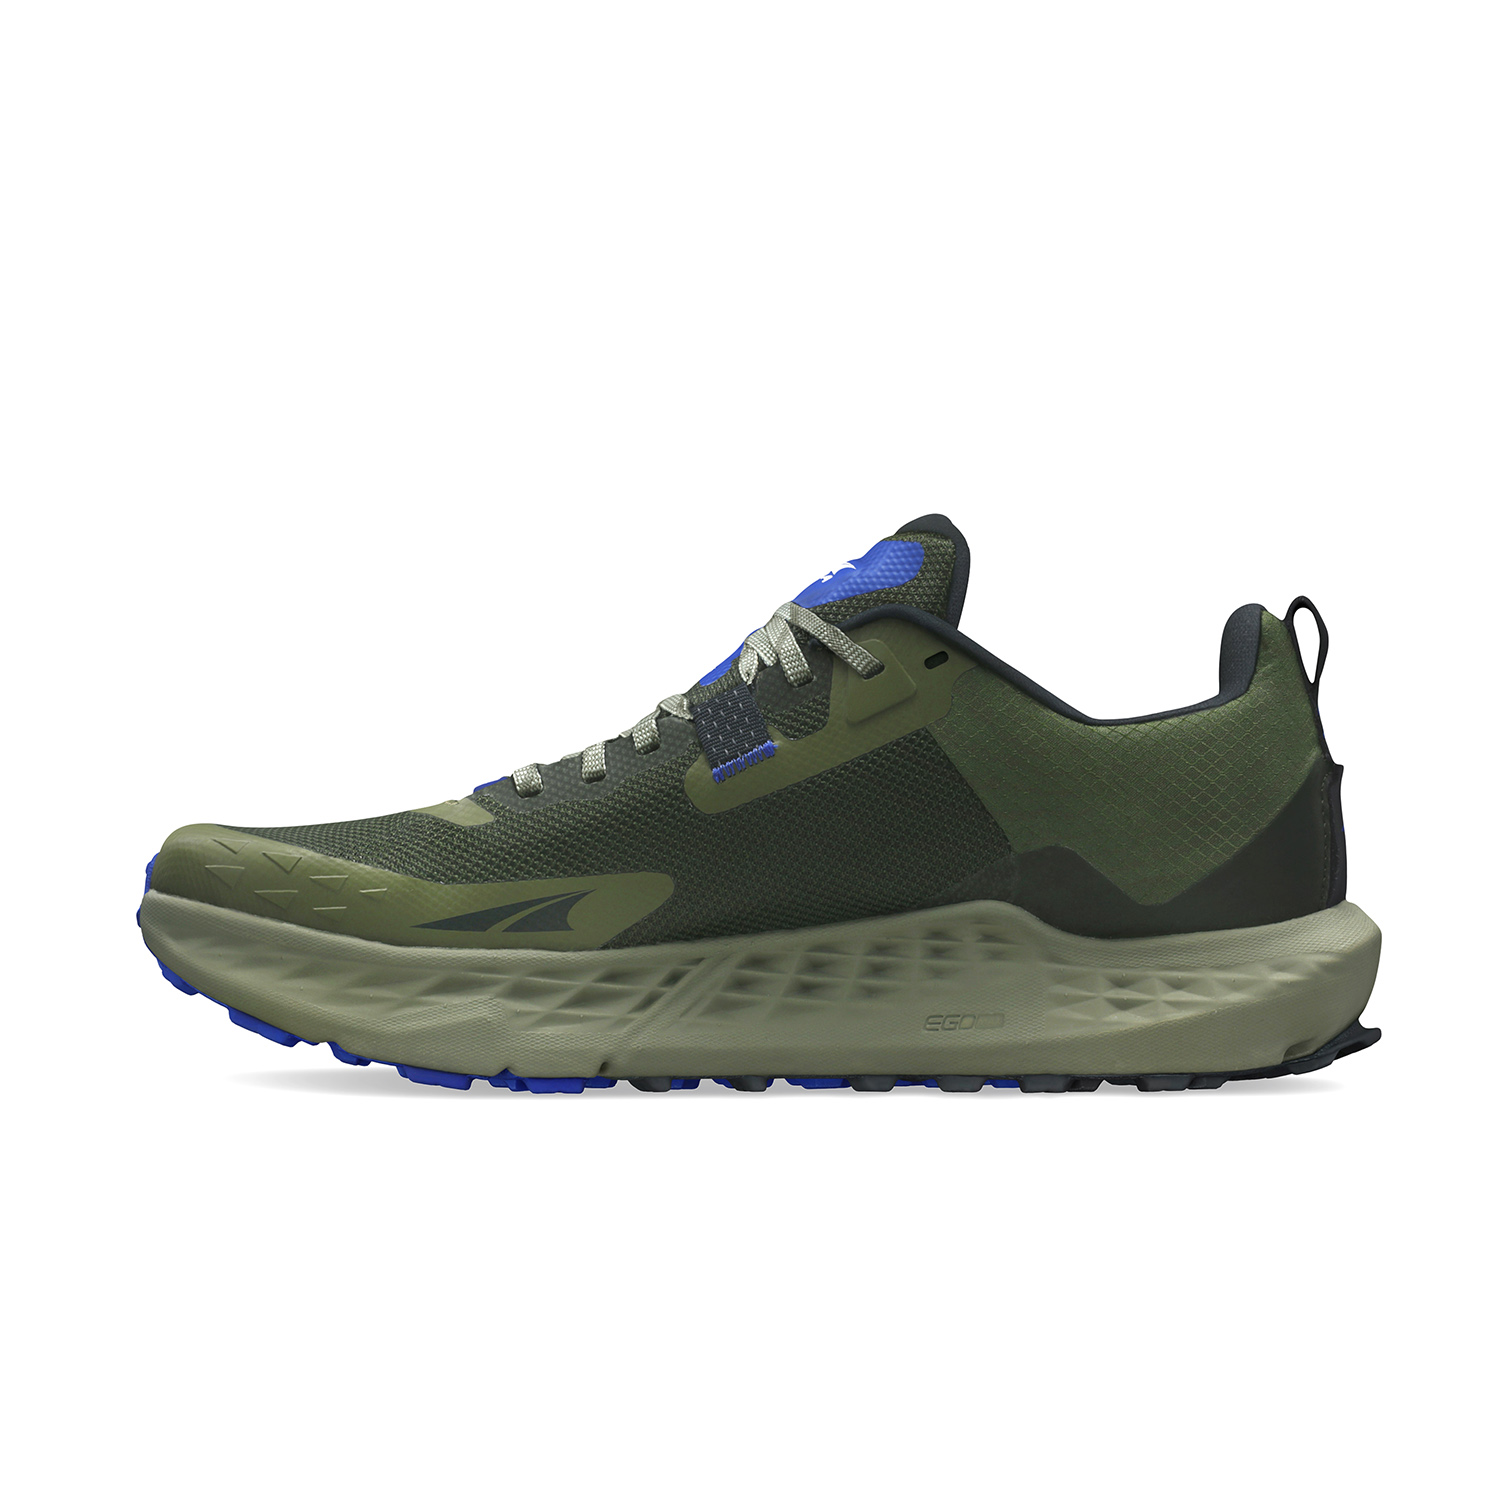 Altra Timp 5 - Dusty Olive